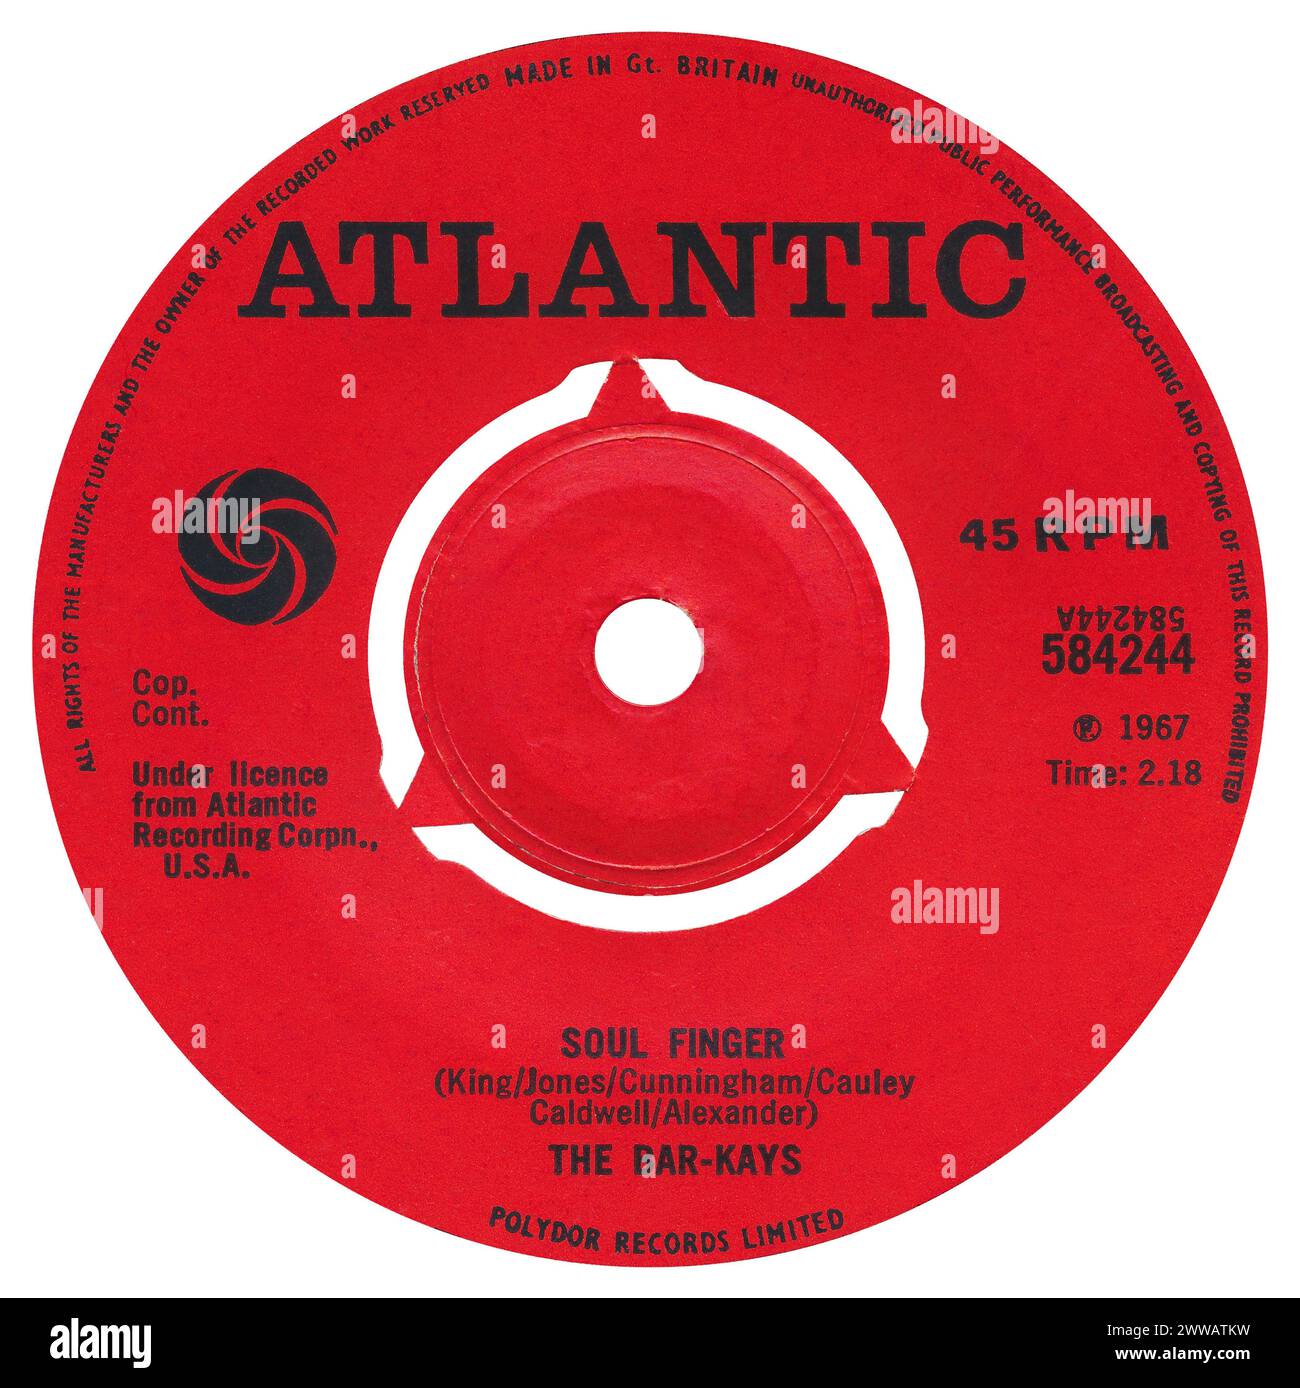 45 RPM 7' UK record label of Soul Finger by the Bar-Kays on the Atlantic label from 1969. The single was originally issued in the UK on Stax in 1967. Written by the Bar-Kays. Stock Photo